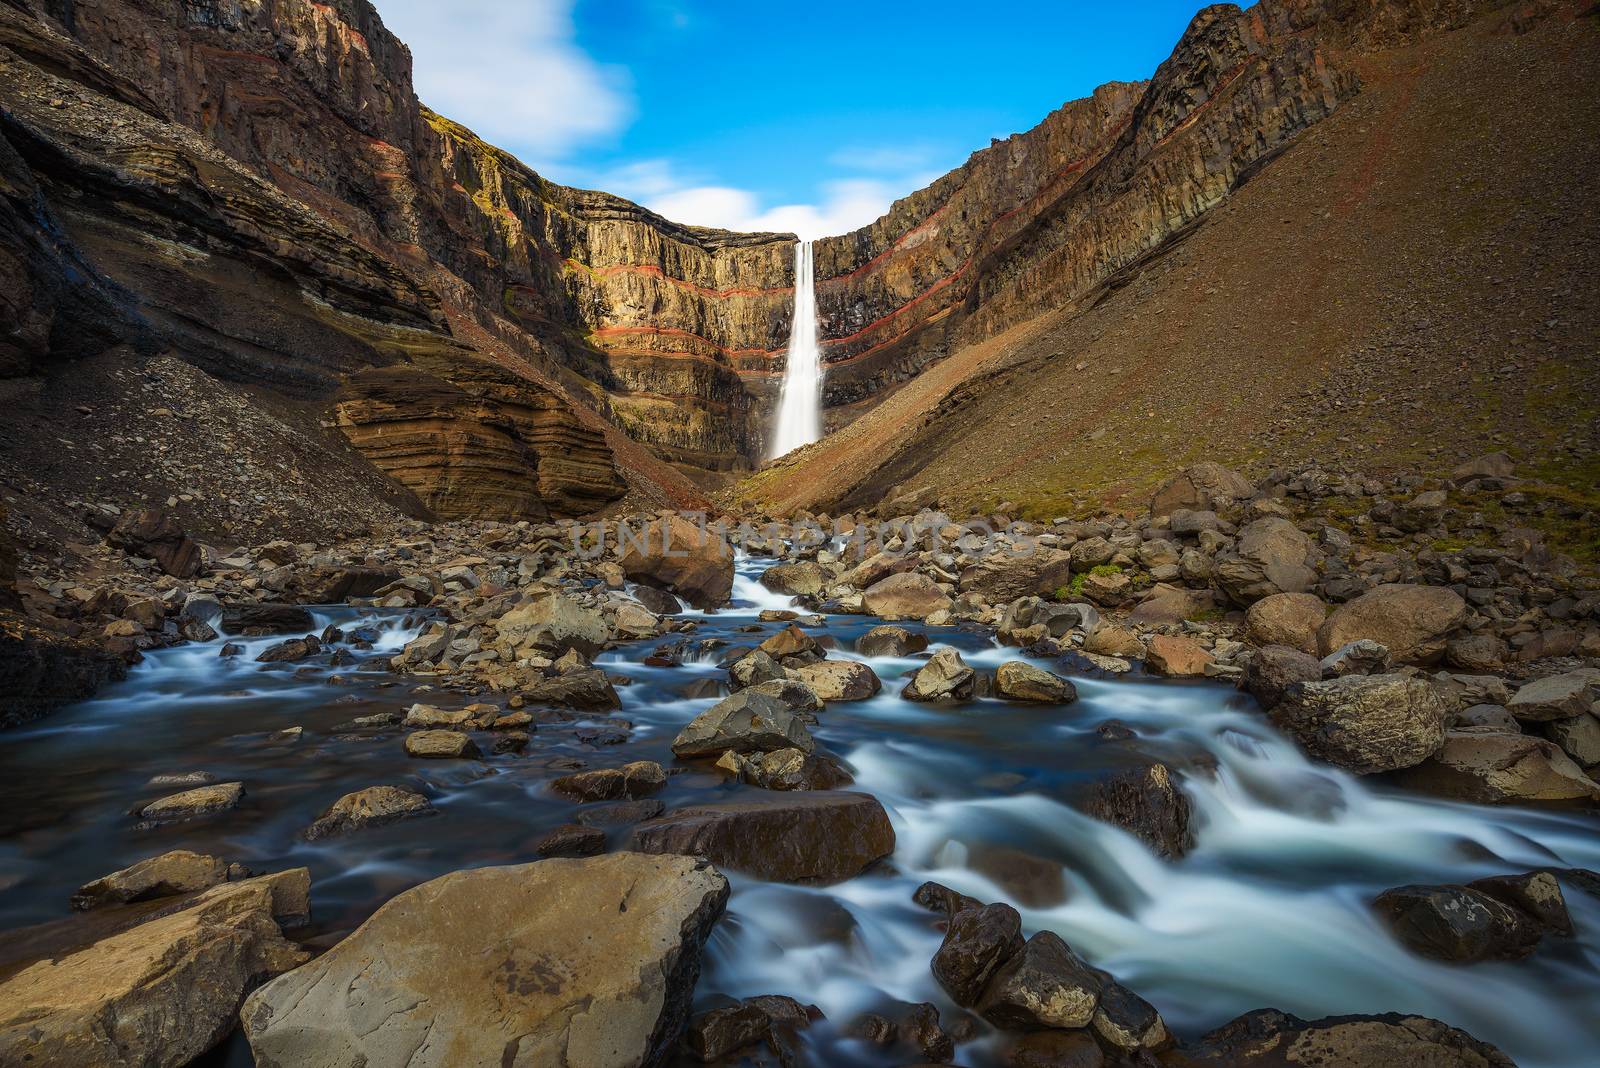 Hengifoss waterfall in East Iceland. Hengifoss is the third highest waterfall in Iceland and is surrounded by basaltic strata with red layers of clay between the basaltic layers. Long exposure.